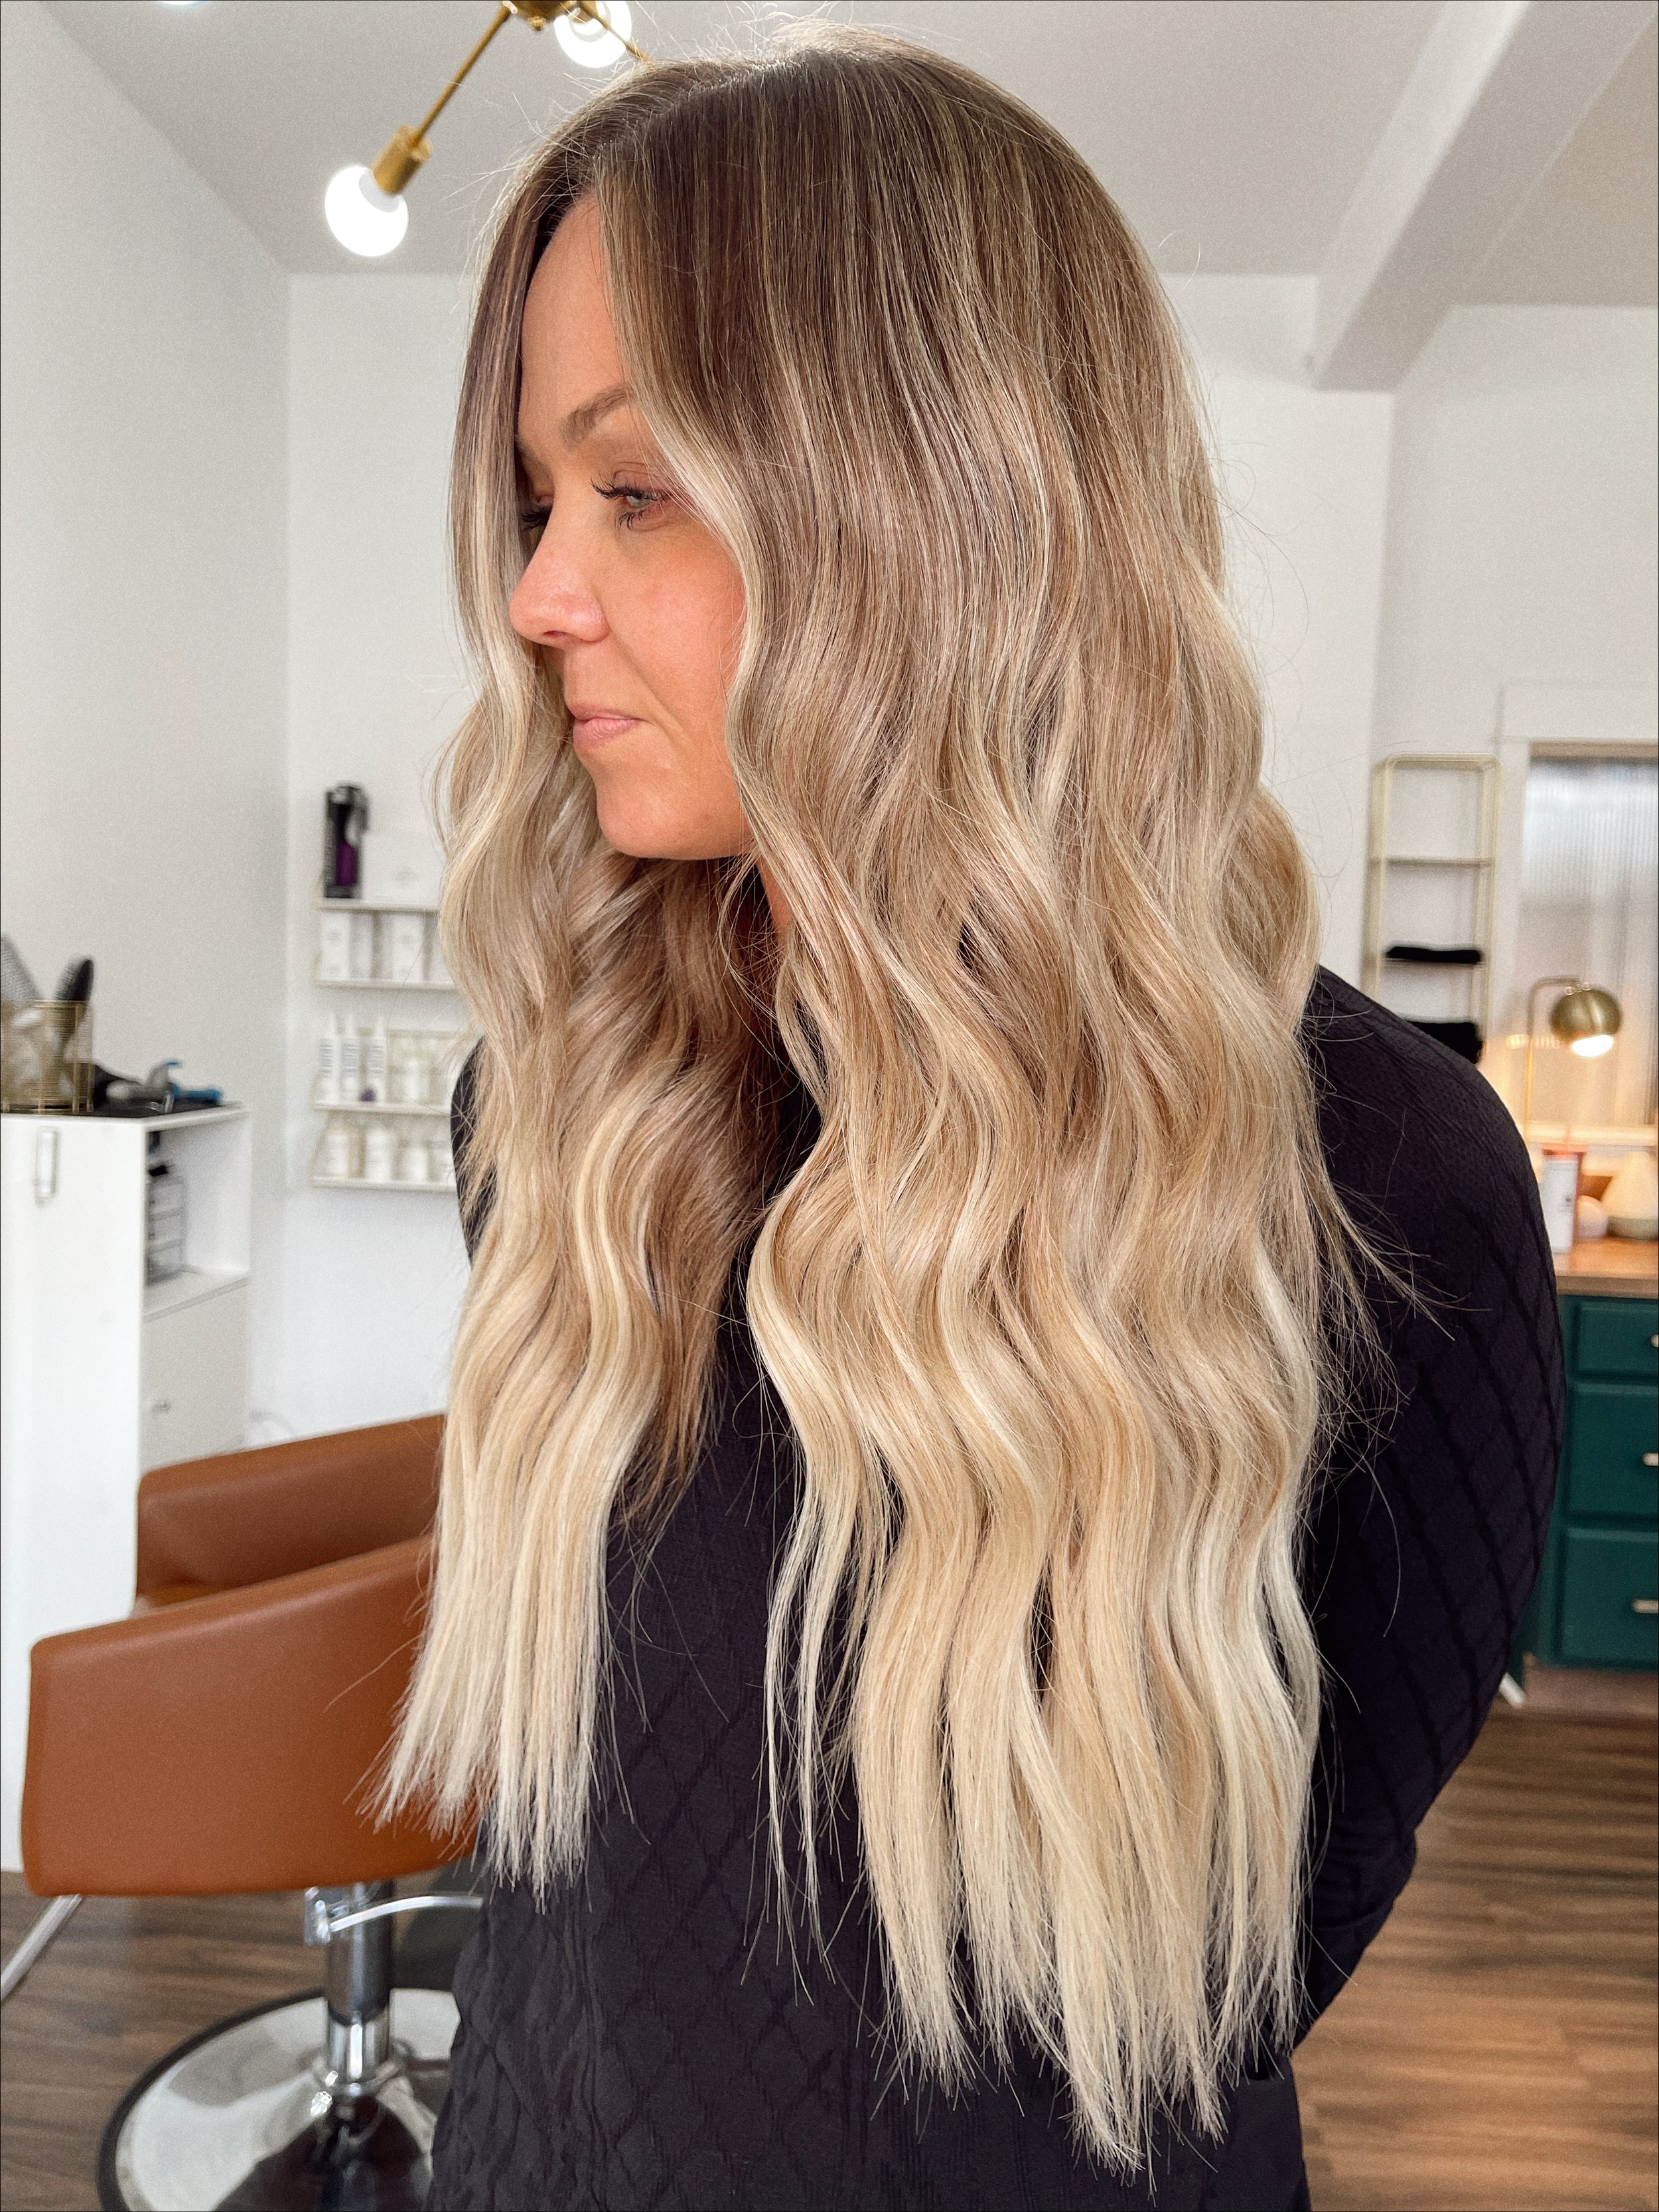 Hair Extension Services in Bend, Oregon | Bend Extensions